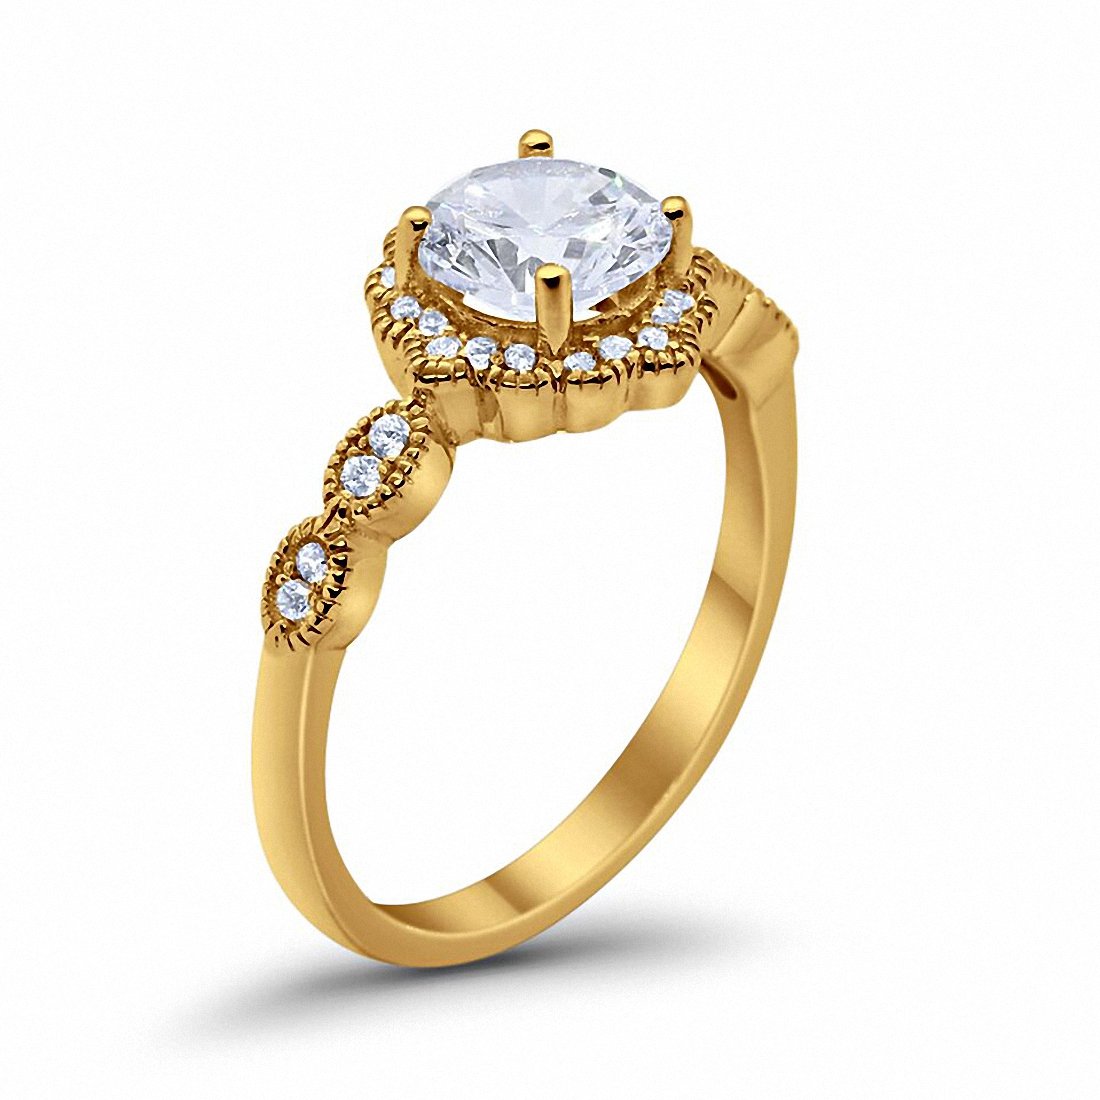 Floral Art Engagement Ring Yellow Tone, Simulated CZ 925 Sterling Silver